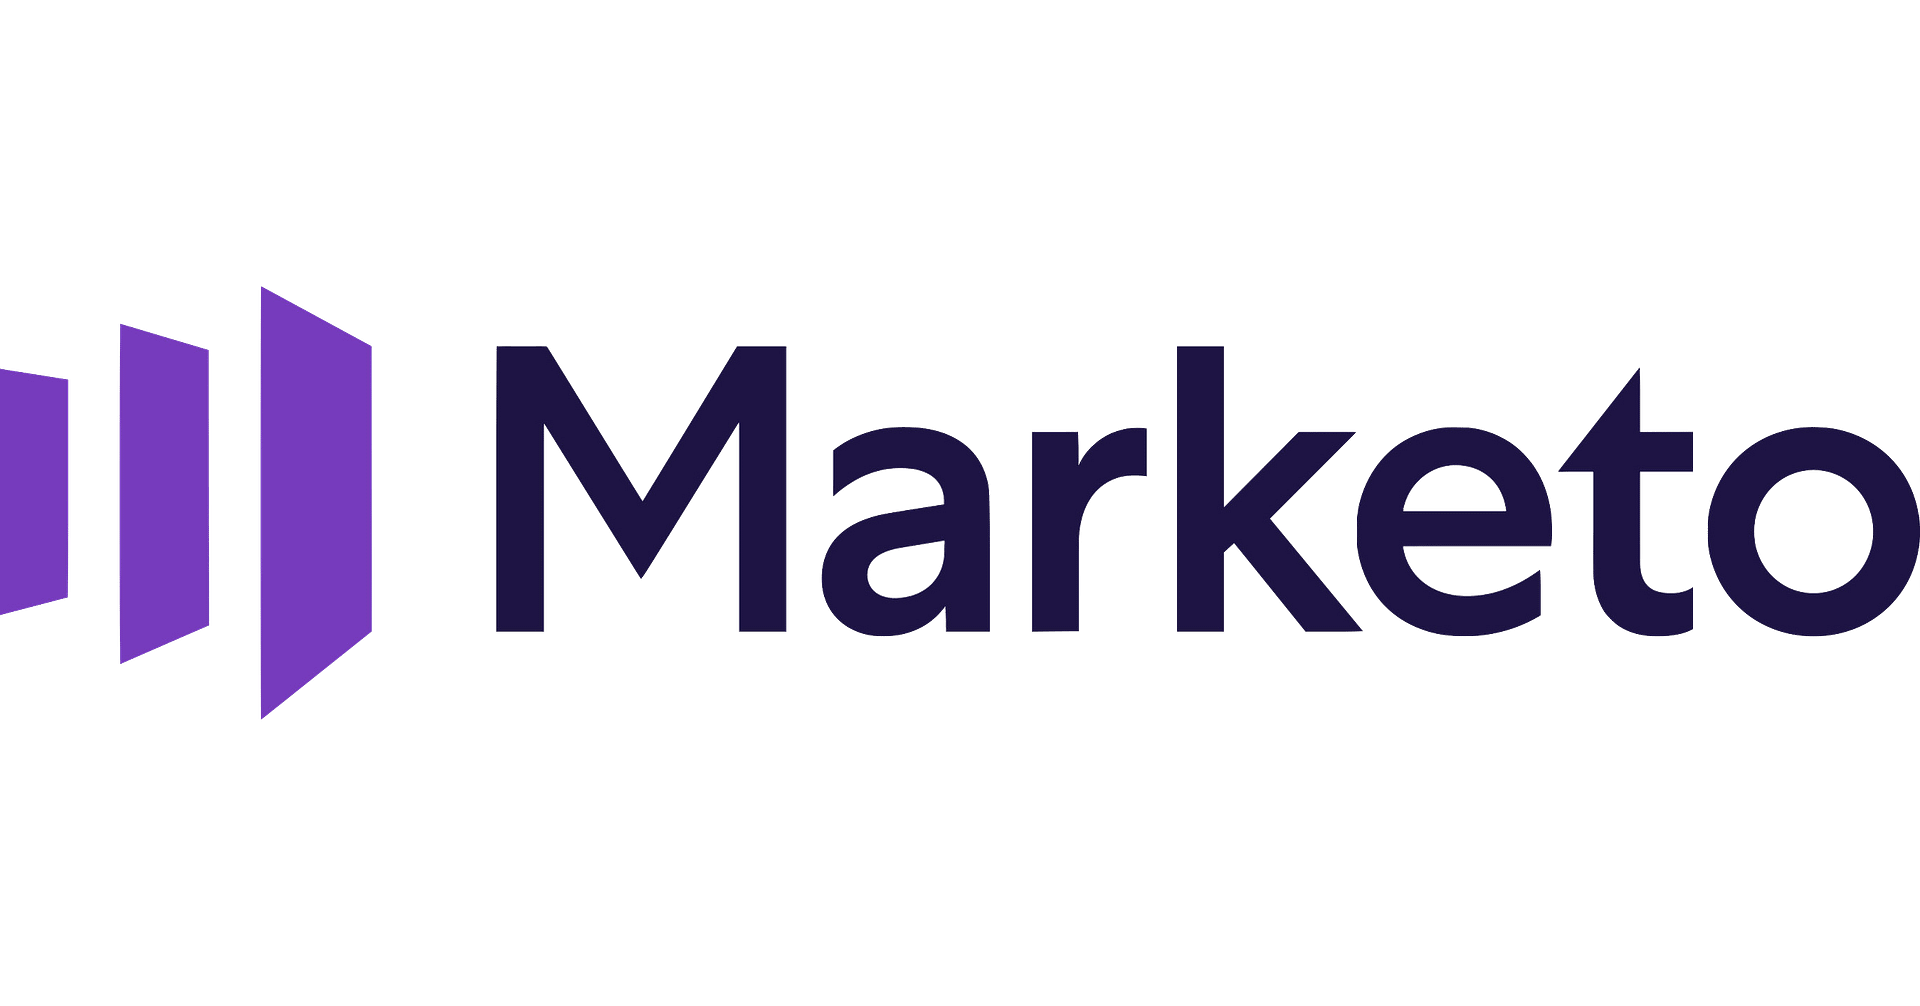 Marketo develops and sells marketing automation software for account-based marketing and other marketing services and products including SEO and content creation.